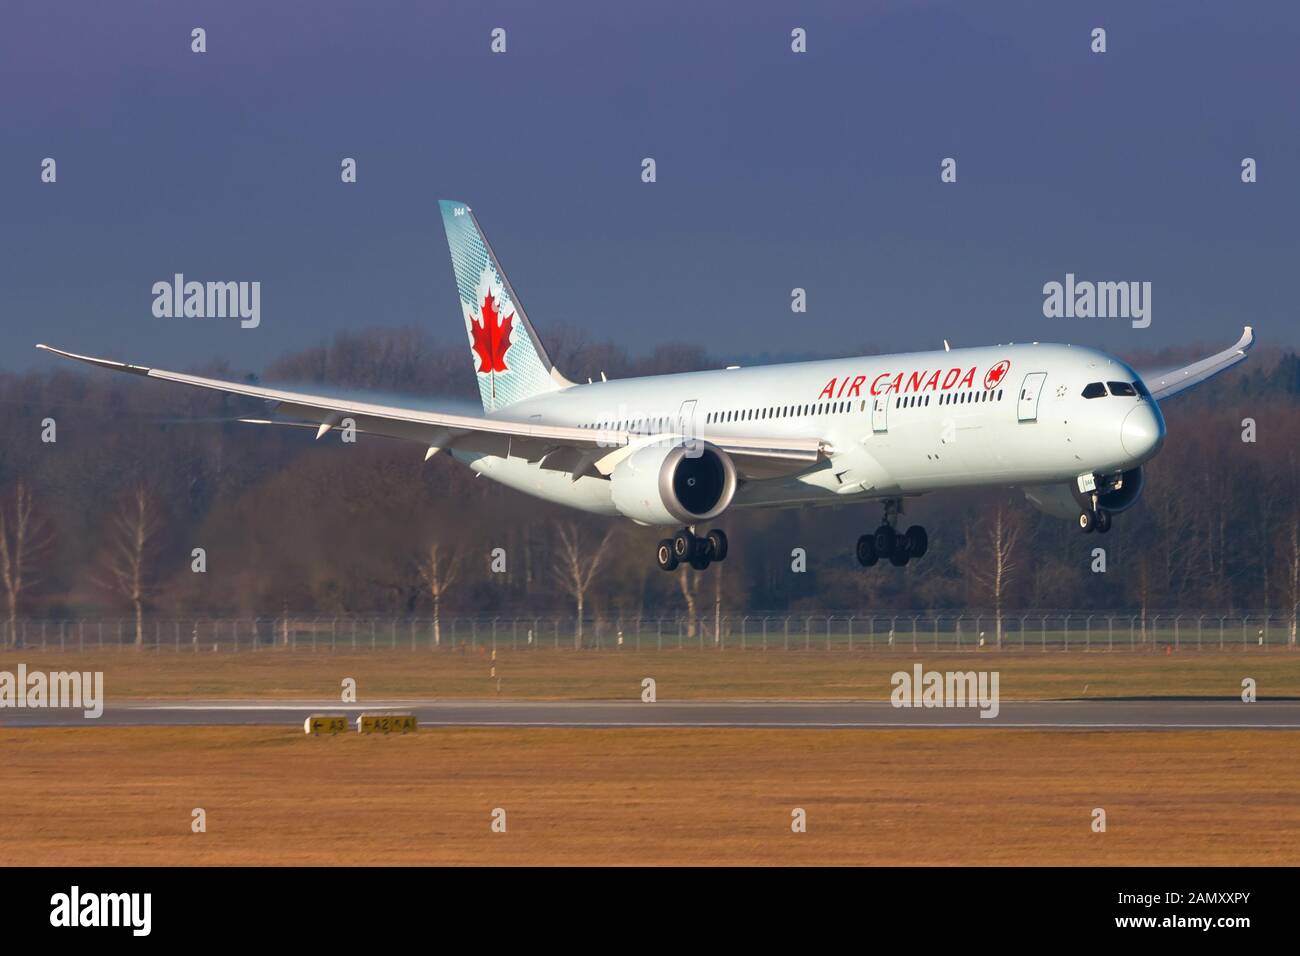 Munich, Germany - Junary 6, 2018: Air Canada Boeing 787 airplane at Munich airport (MUC) in Germany. Boeing is an aircraft manufacturer based in Seatt Stock Photo